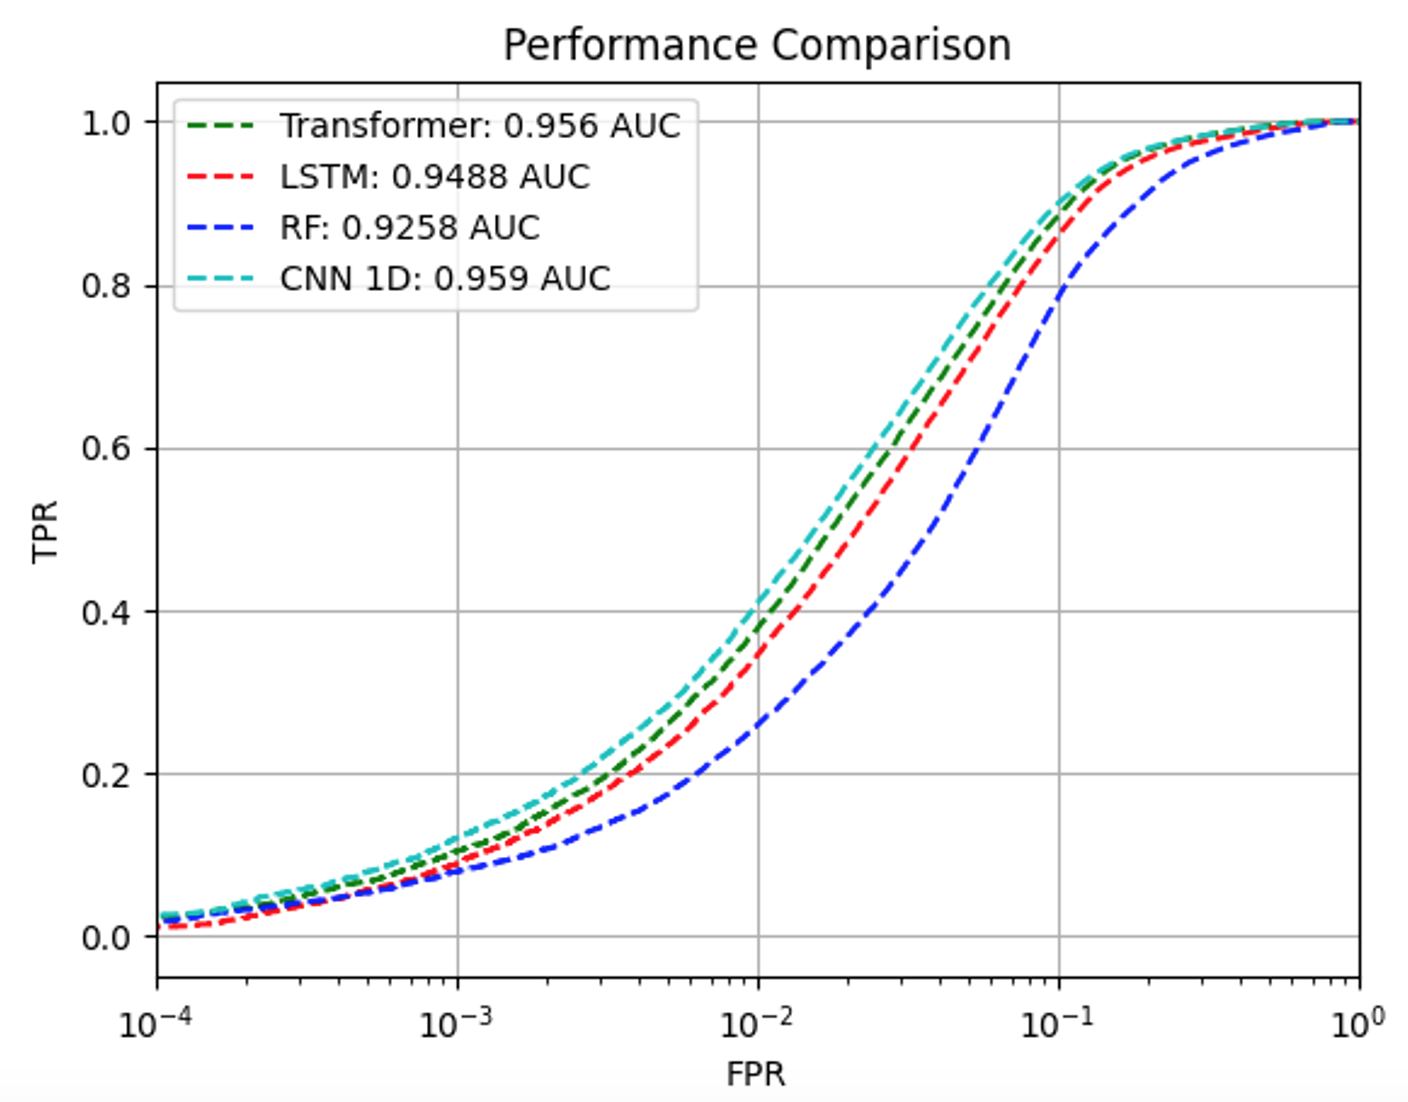 ROC curves comparing URL Transformer to other benchmark URL classification models